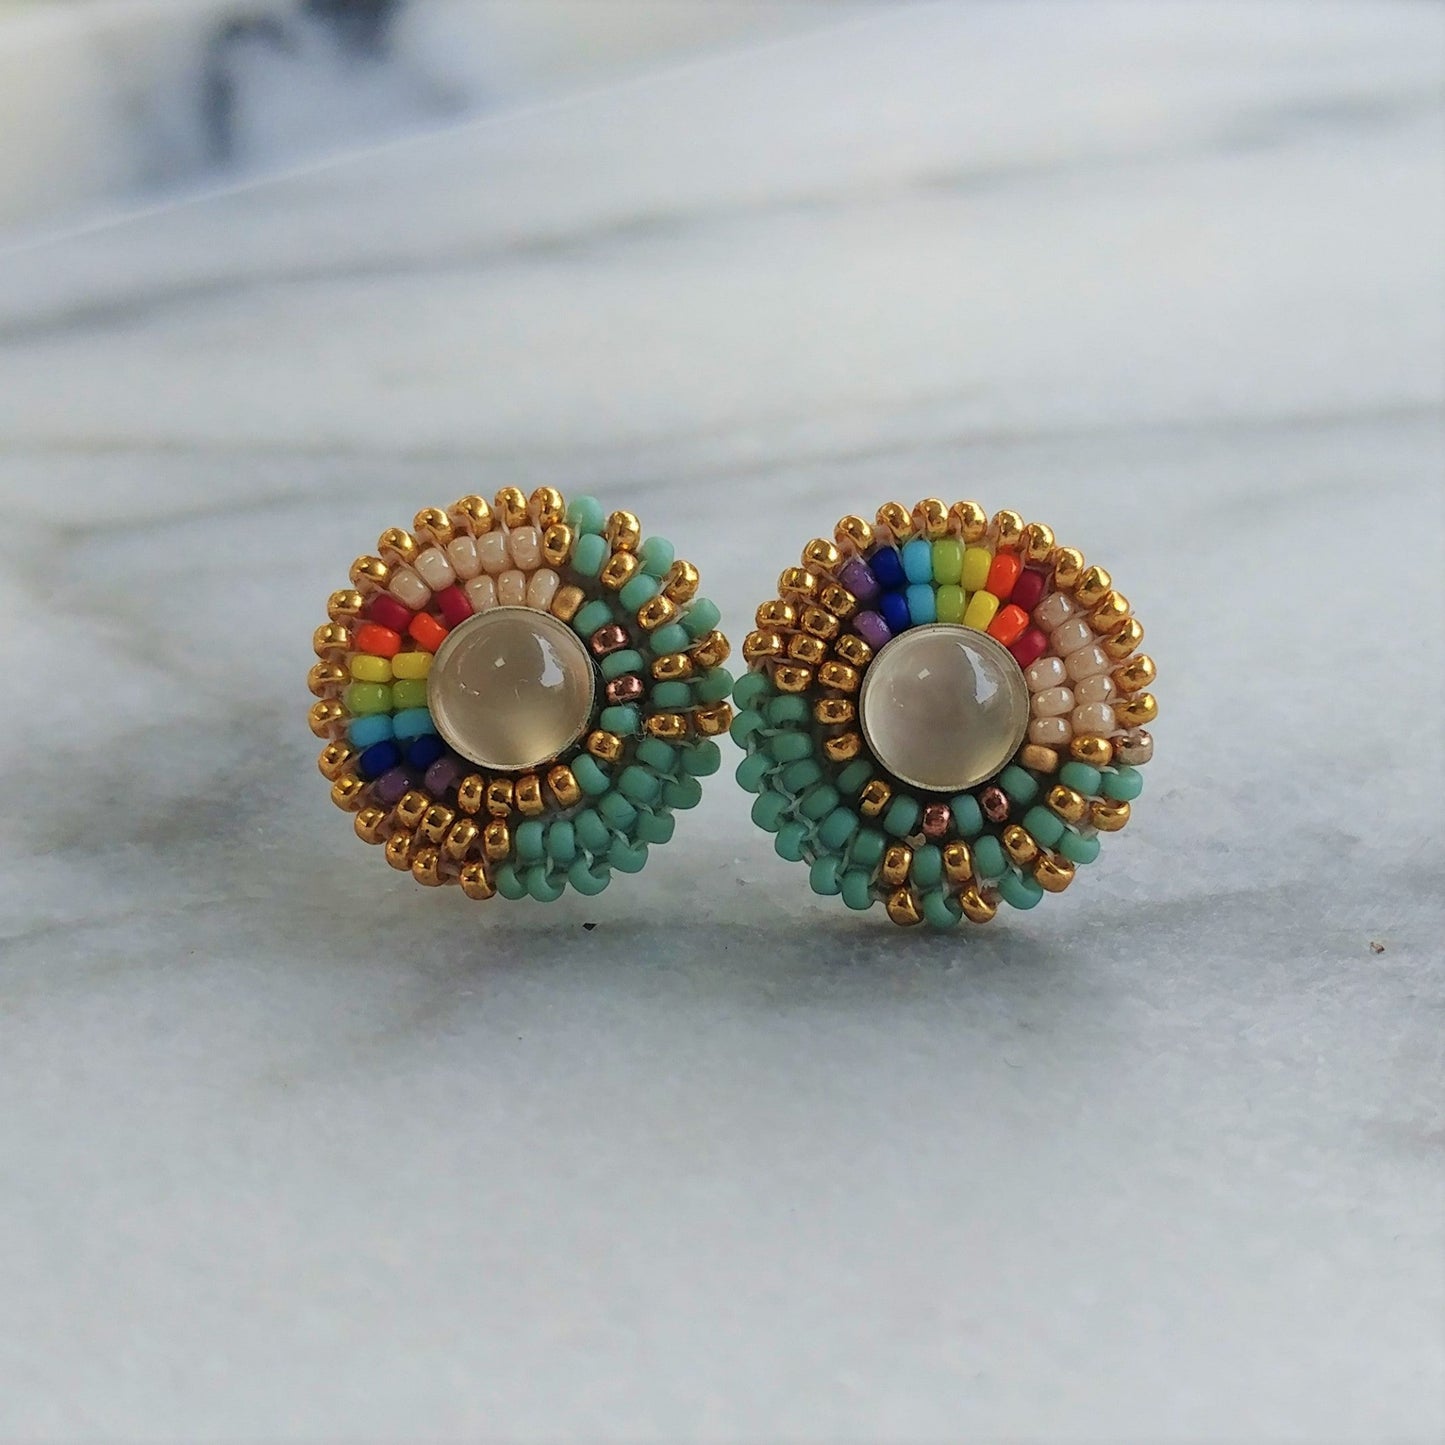 Cheyanne Symone’s Moonstone Two-Spirit Pride Stud Earrings | Rainbow Glass Beads Wrapped Around a Moonstone Center